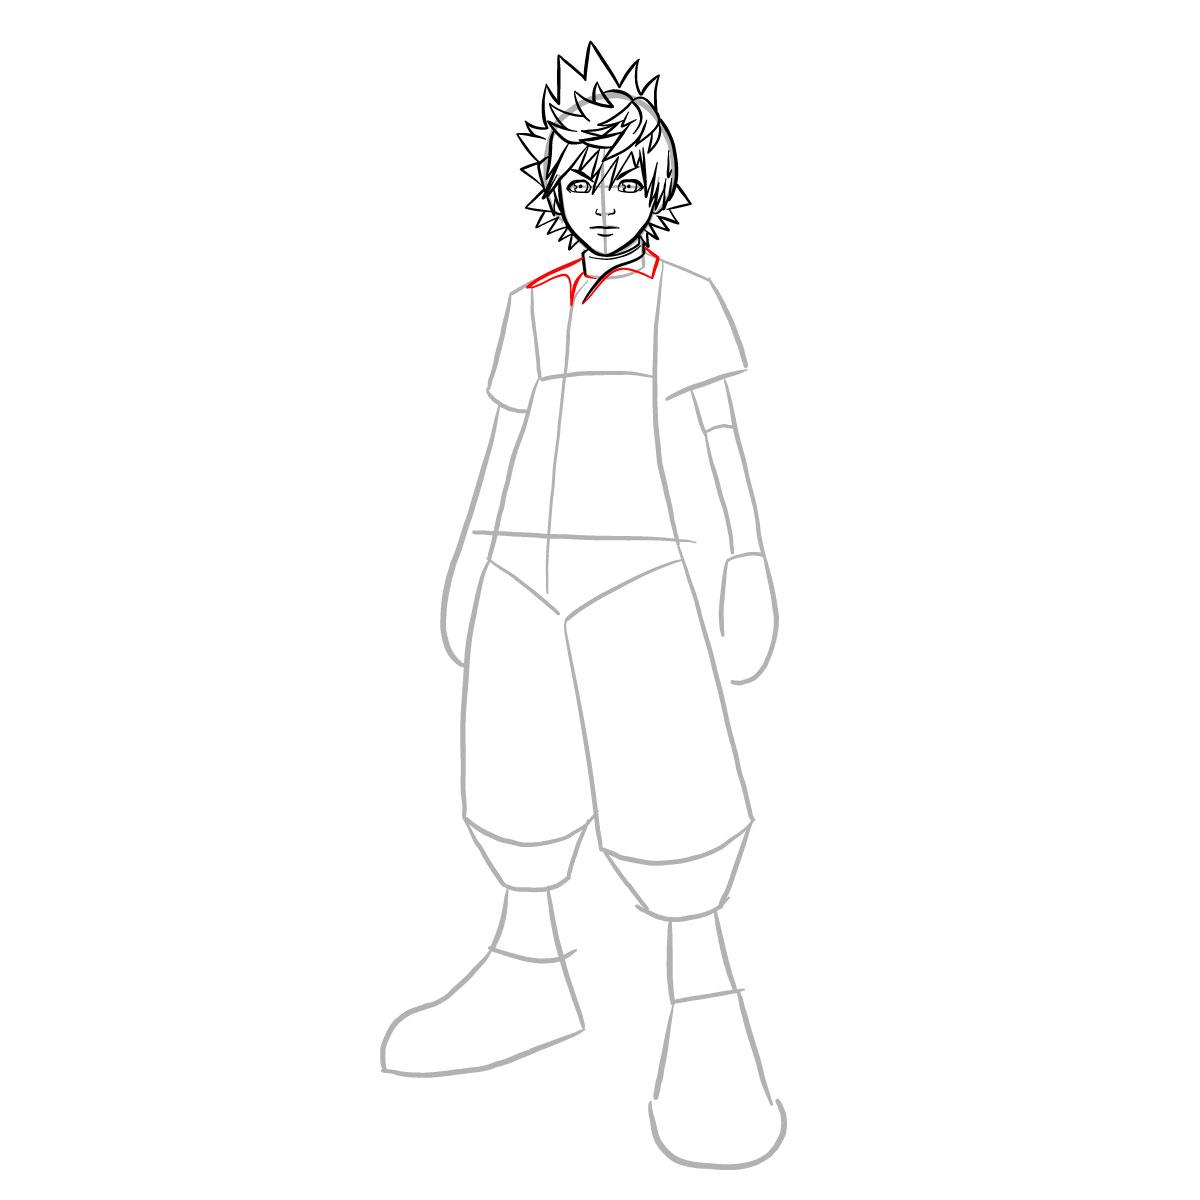 How to draw Ventus - step 18